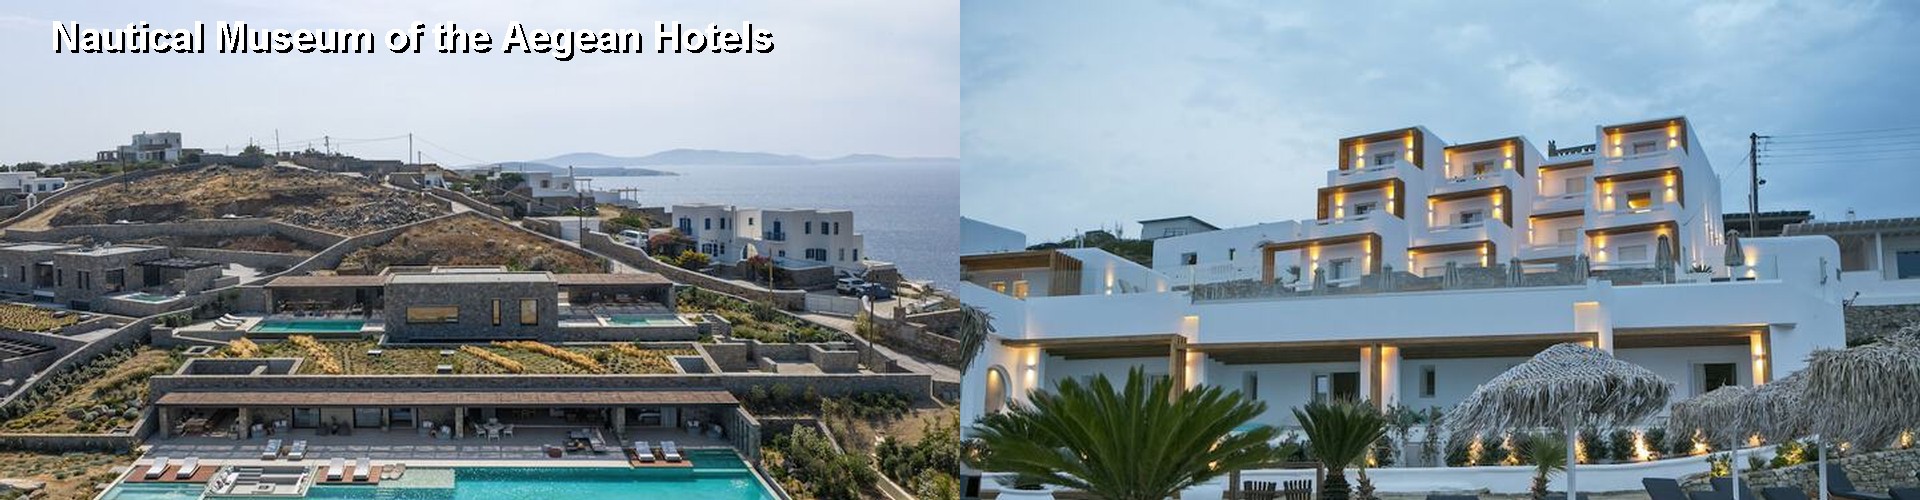 5 Best Hotels near Nautical Museum of the Aegean